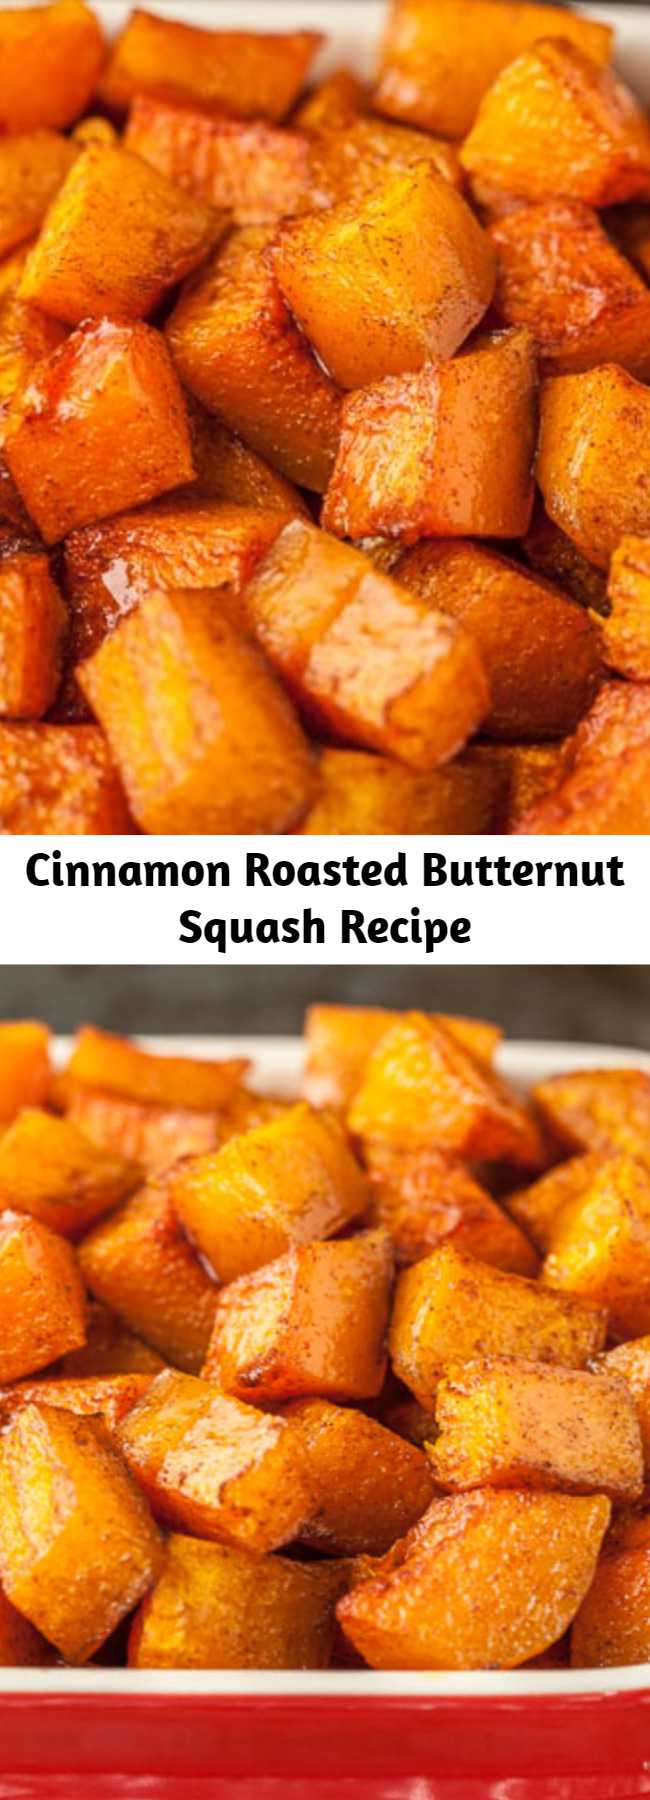 Cinnamon Roasted Butternut Squash Recipe - This Cinnamon Roasted Butternut Squash is the perfect side dish for your fall/winter meals. It’s fantastic as is, or tossed together in salads, soups, or rice bowls. Plus, they’re a powerhouse of nutrition in every tasty bite!